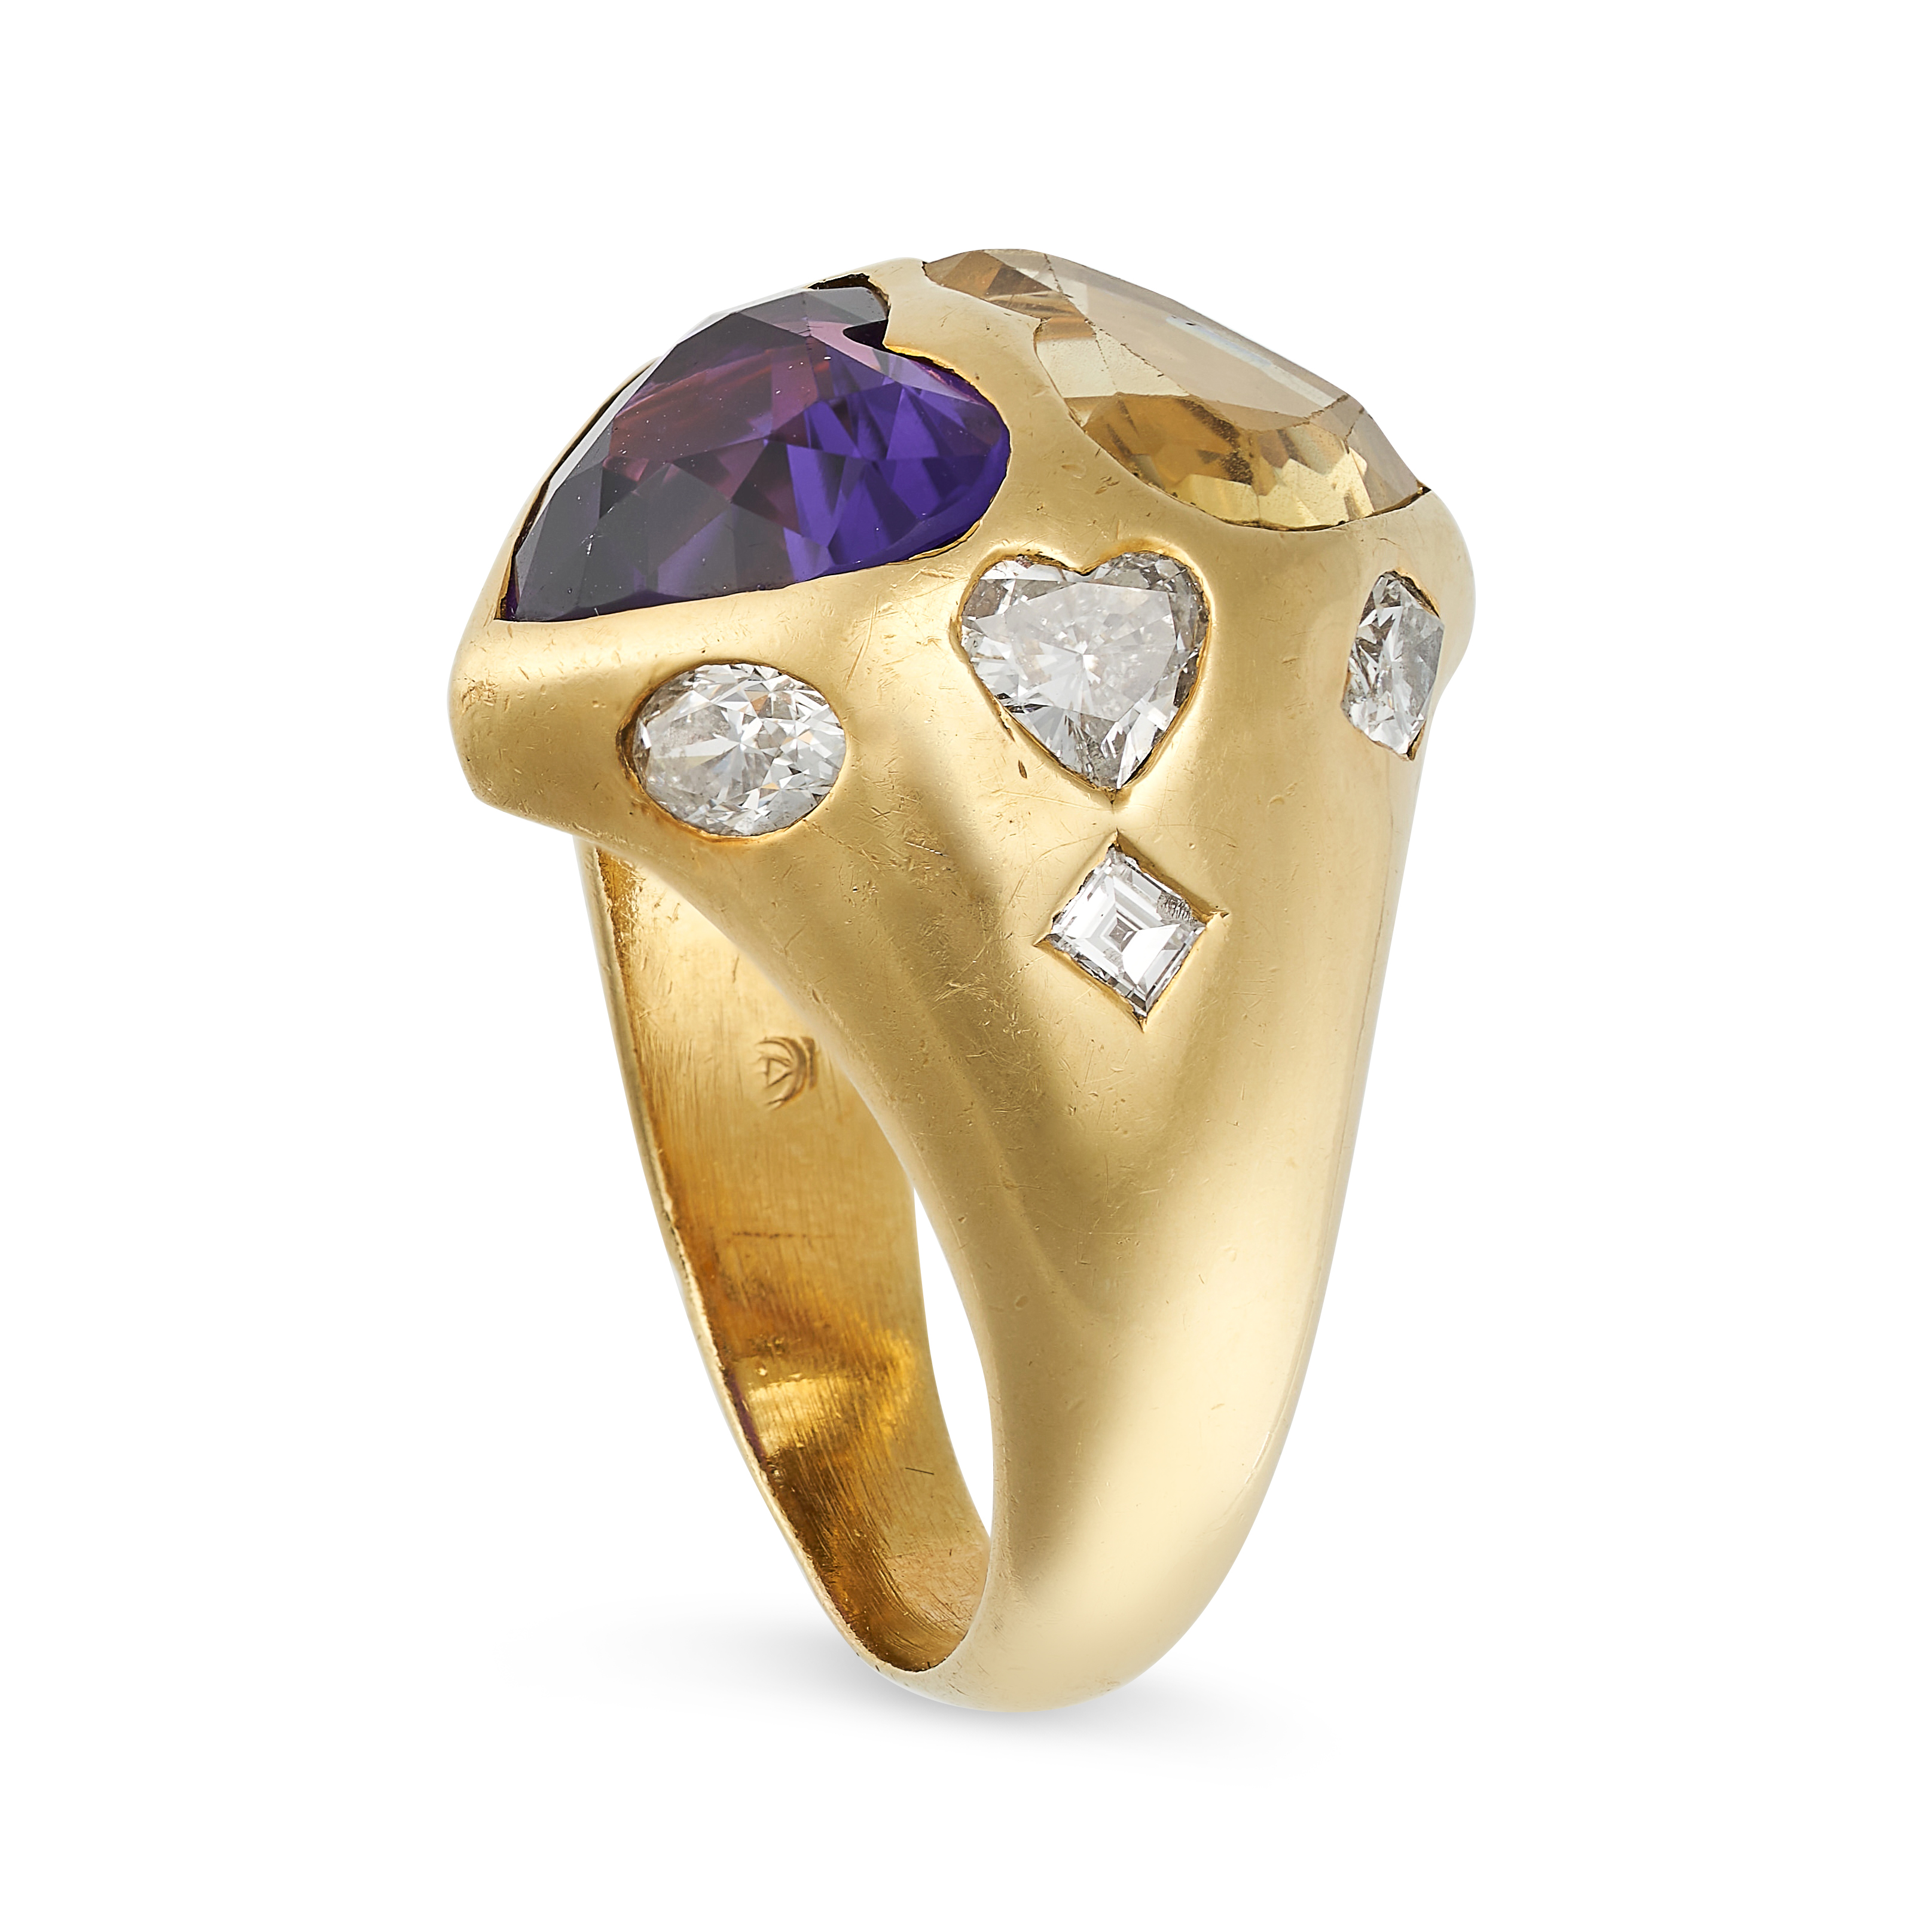 AN UNHEATED YELLOW SAPPHIRE, AMETHYST AND DIAMOND DRESS RING in 18ct yellow gold, the domed face set - Image 2 of 2